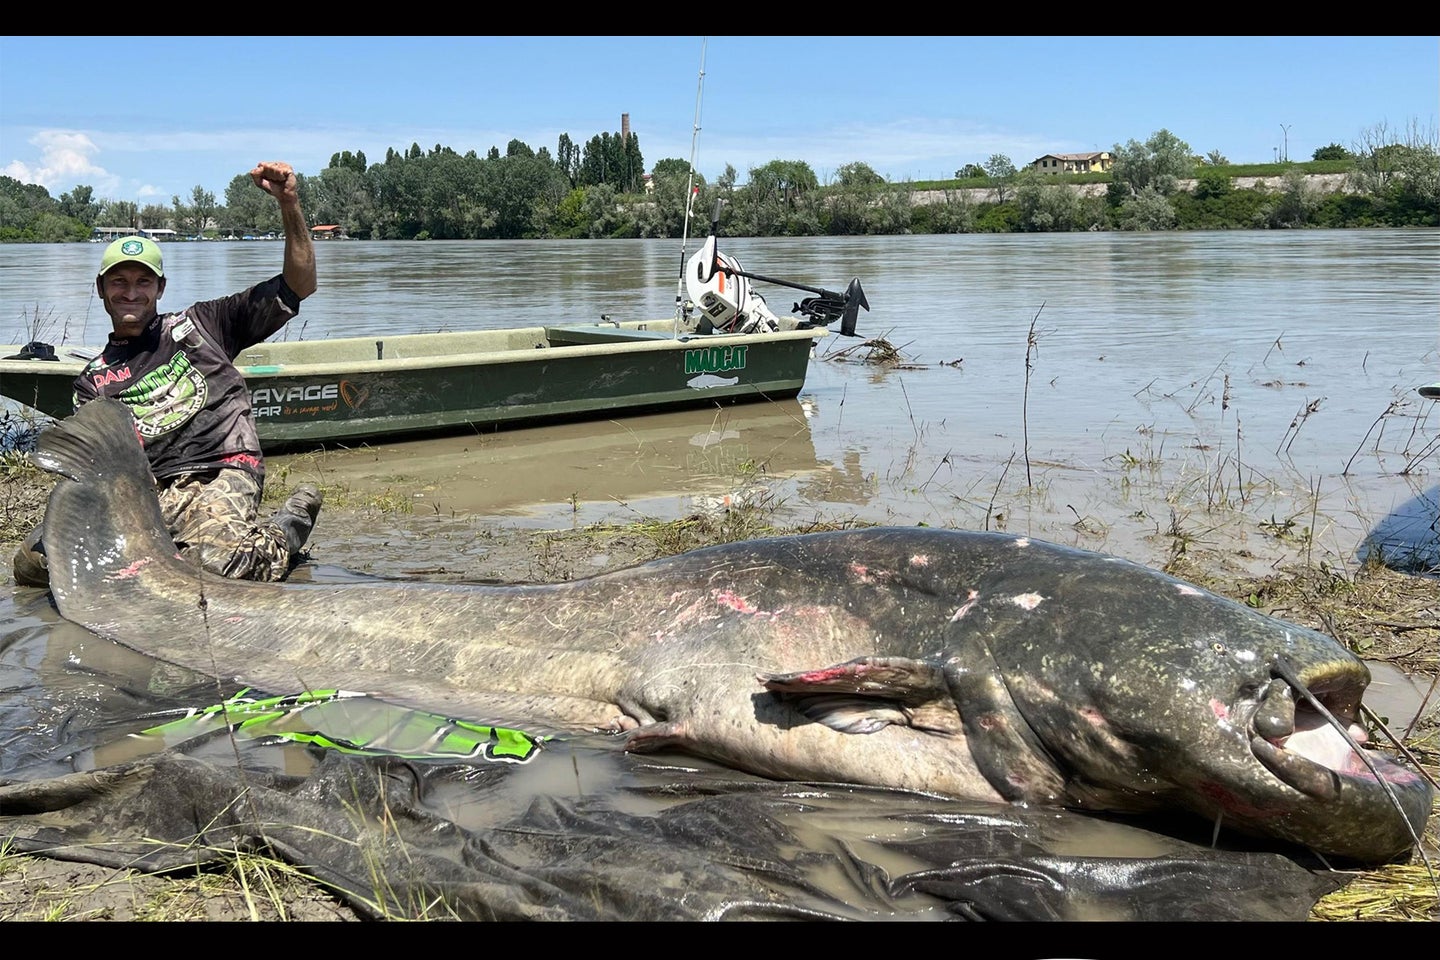 The River Po is famous for producing giant wels catfish.